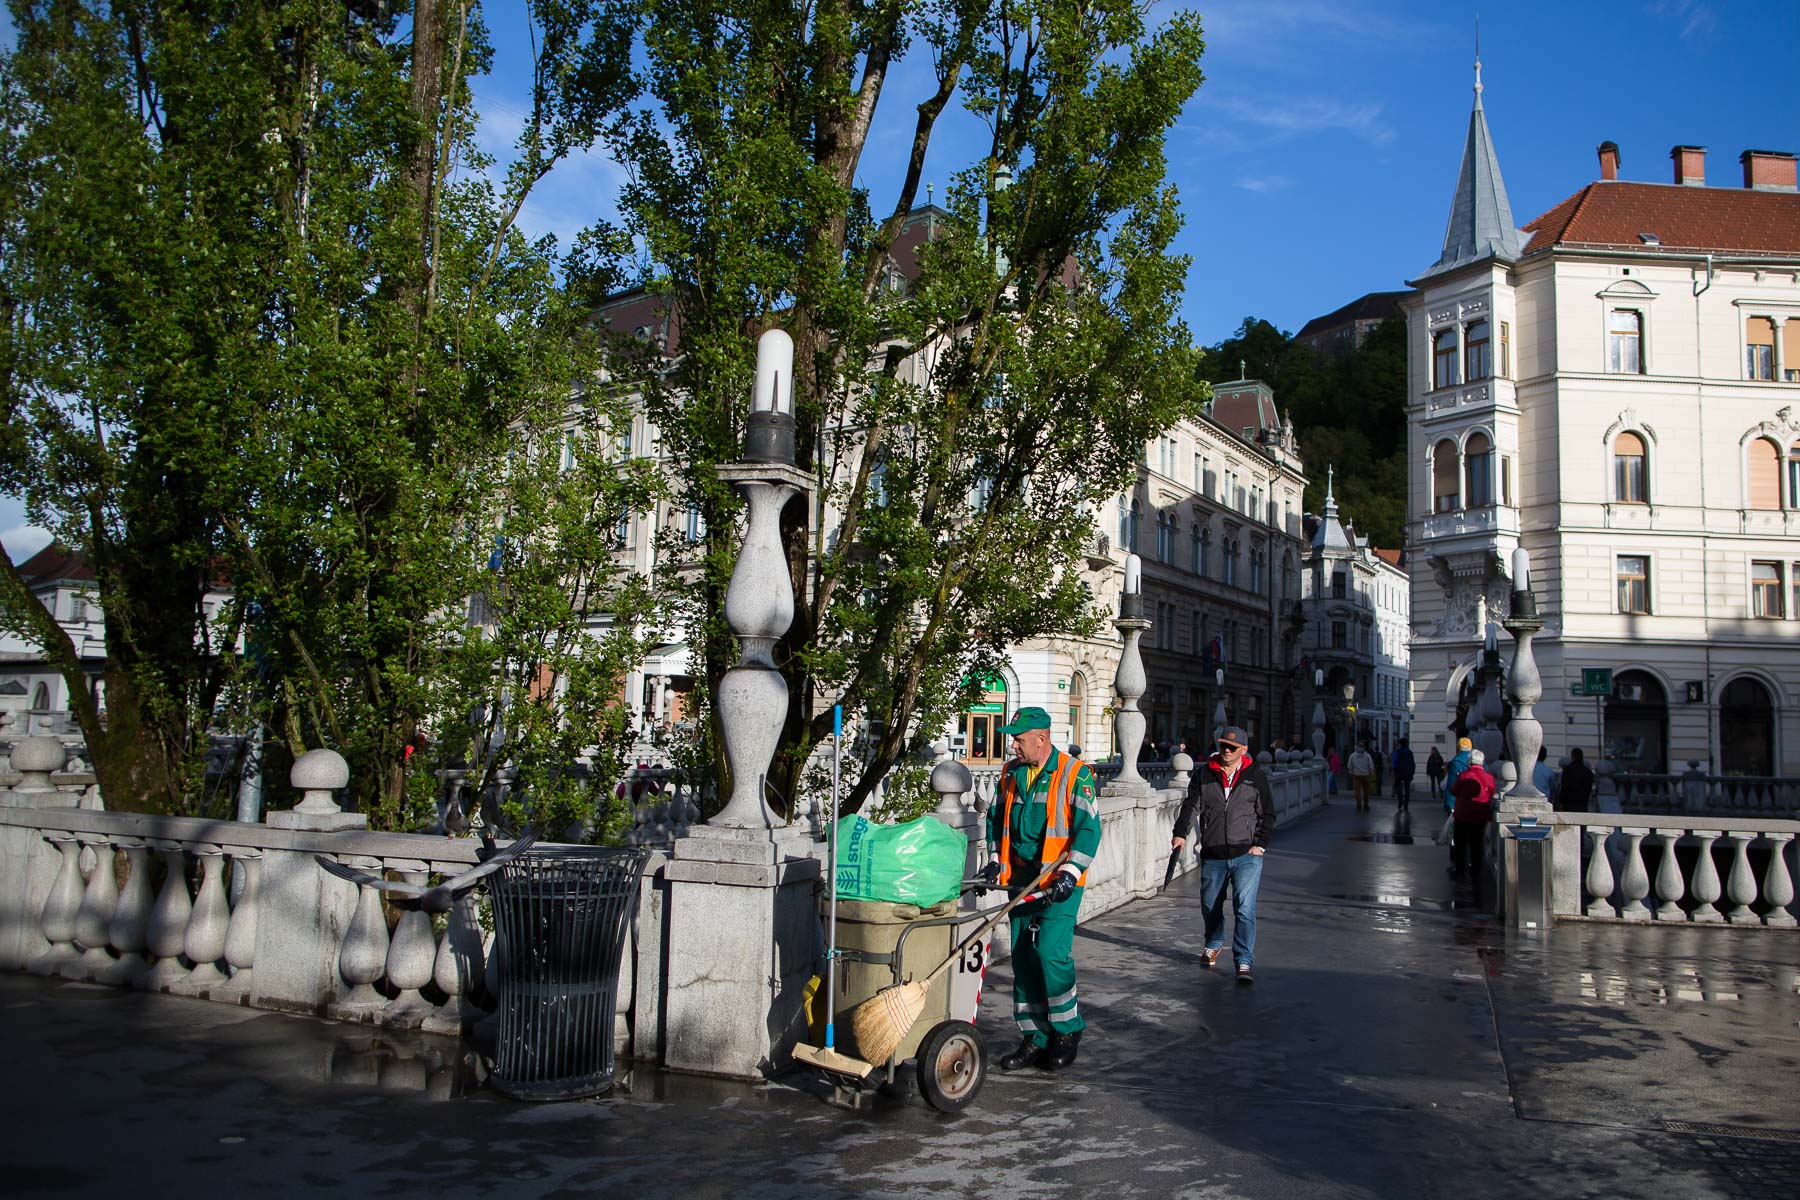 Voka Snaga workers regularly clean the streets of the historical city center of Ljubljana.